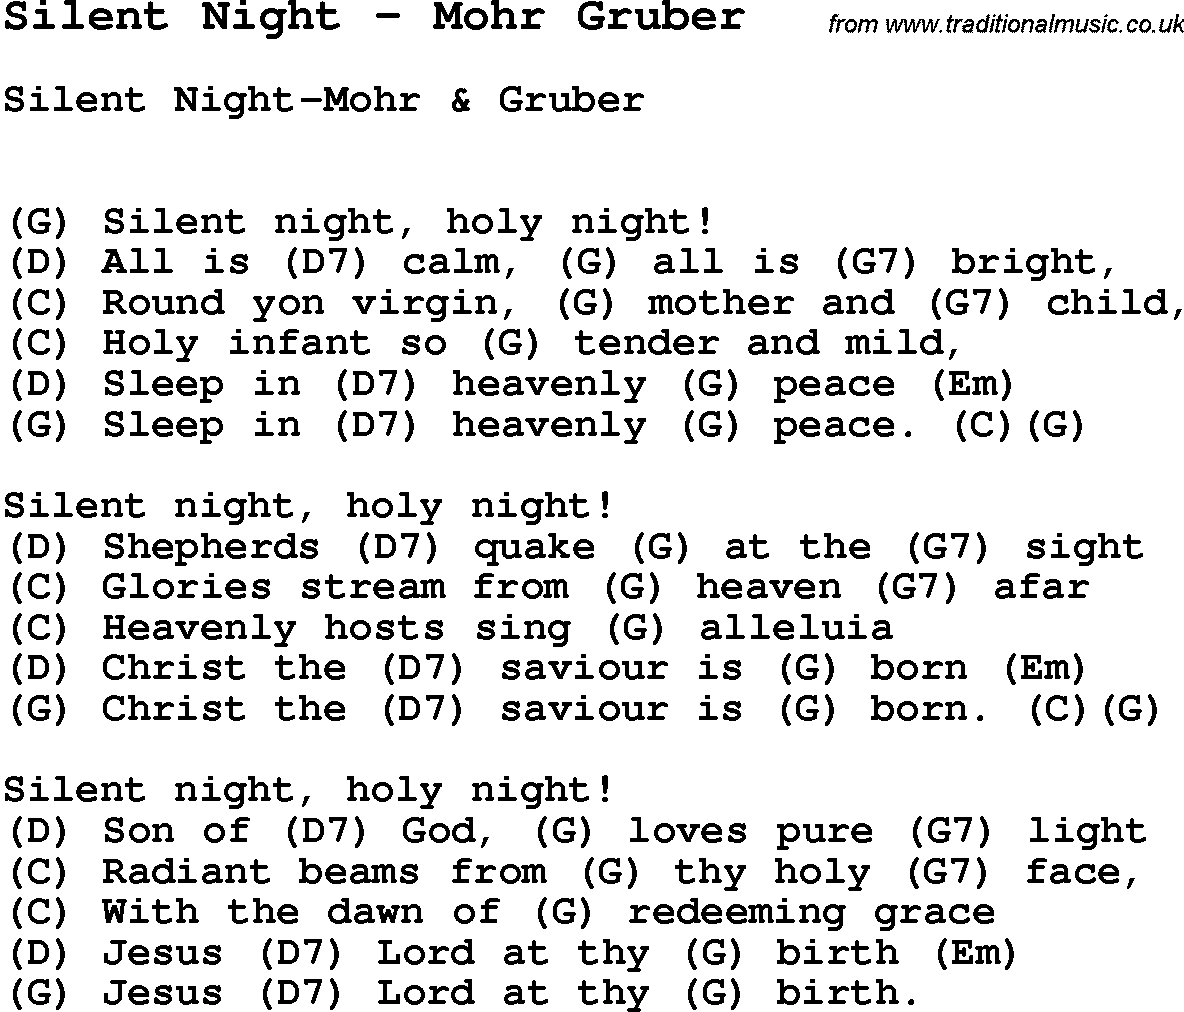 Song Silent Night by Mohr Gruber, with lyrics for vocal performance and accompaniment chords for Ukulele, Guitar Banjo etc.